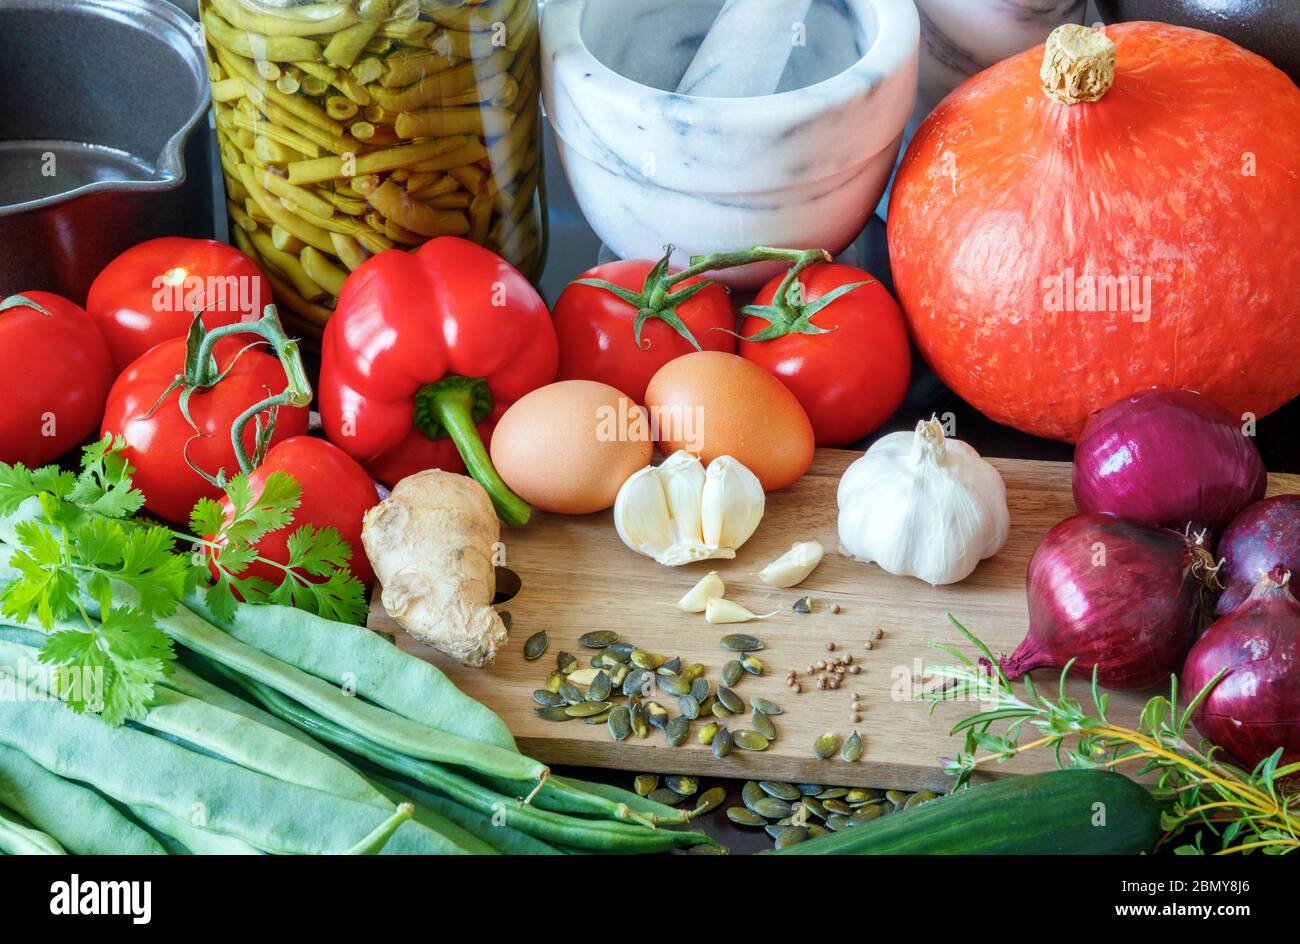 Composition of healty vegetables, herbs, spices, seeds, eggs and cooking utensils. Stock Photo